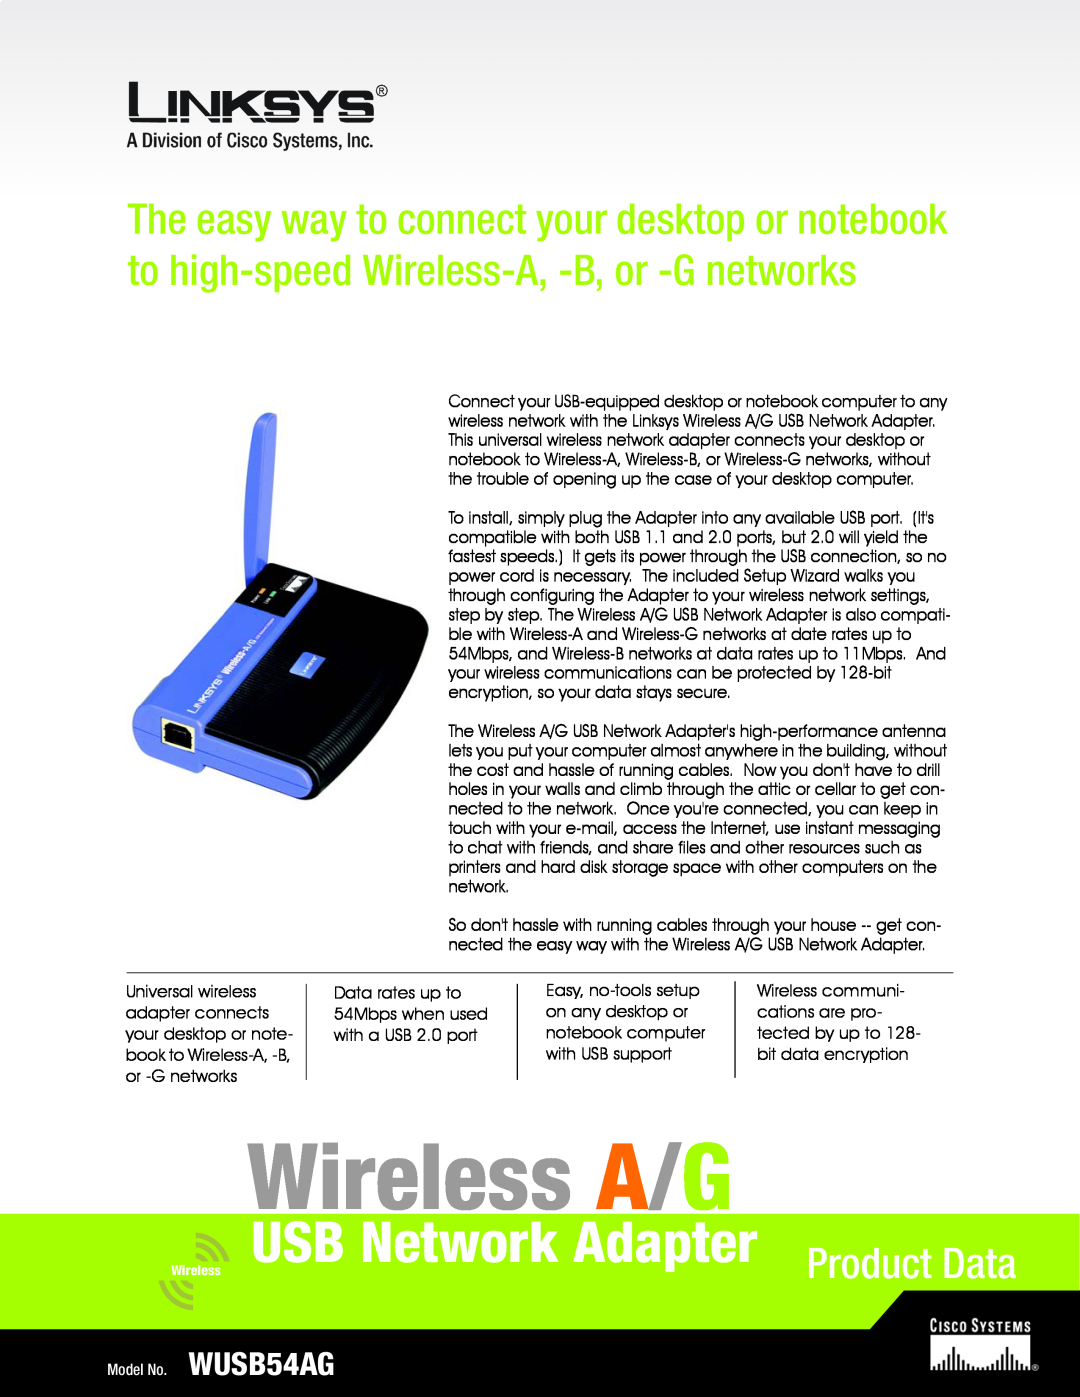 Linksys WUSB54AG manual Wireless A/G, USB Network Adapter Product Data 